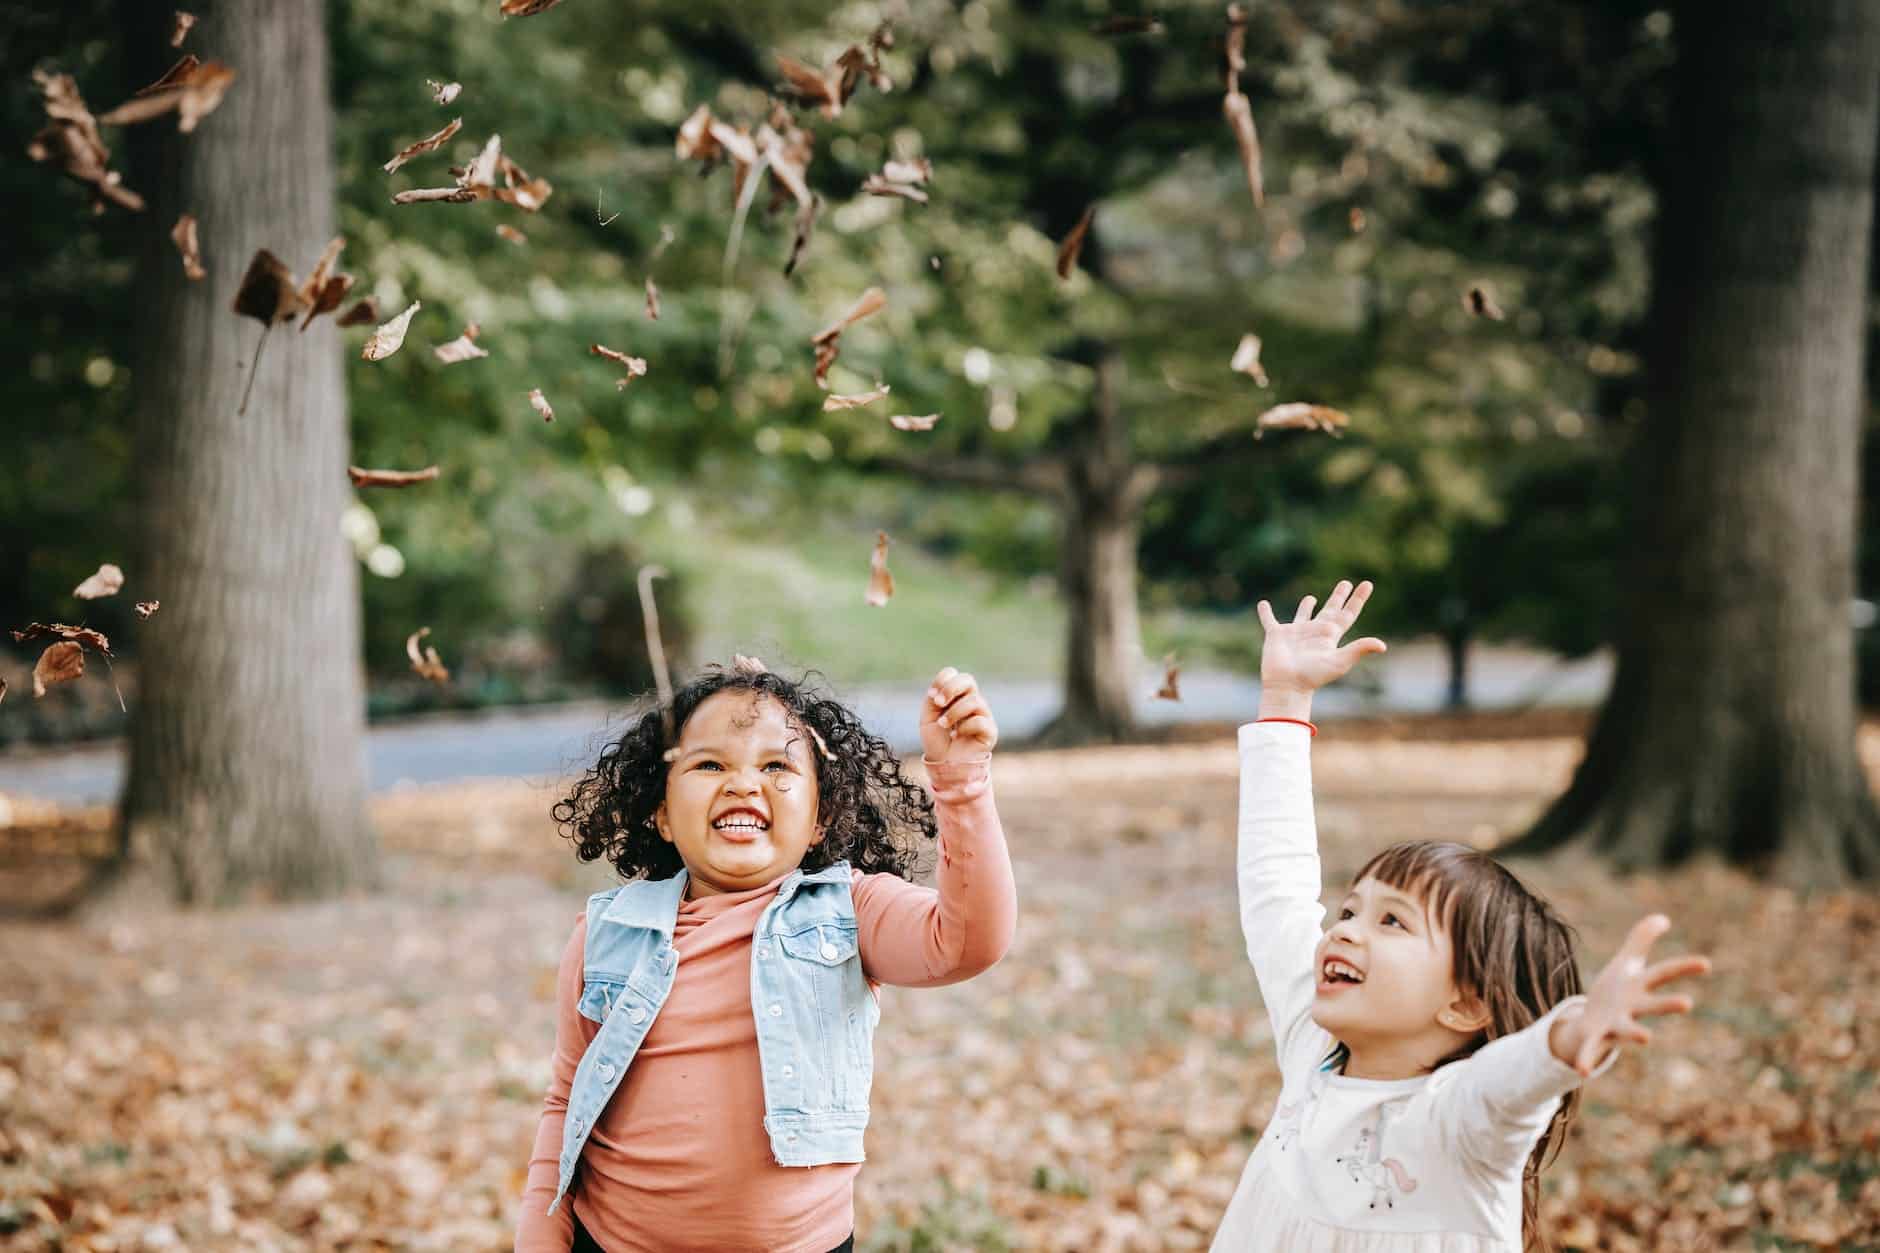 excited children tossing leaves in park